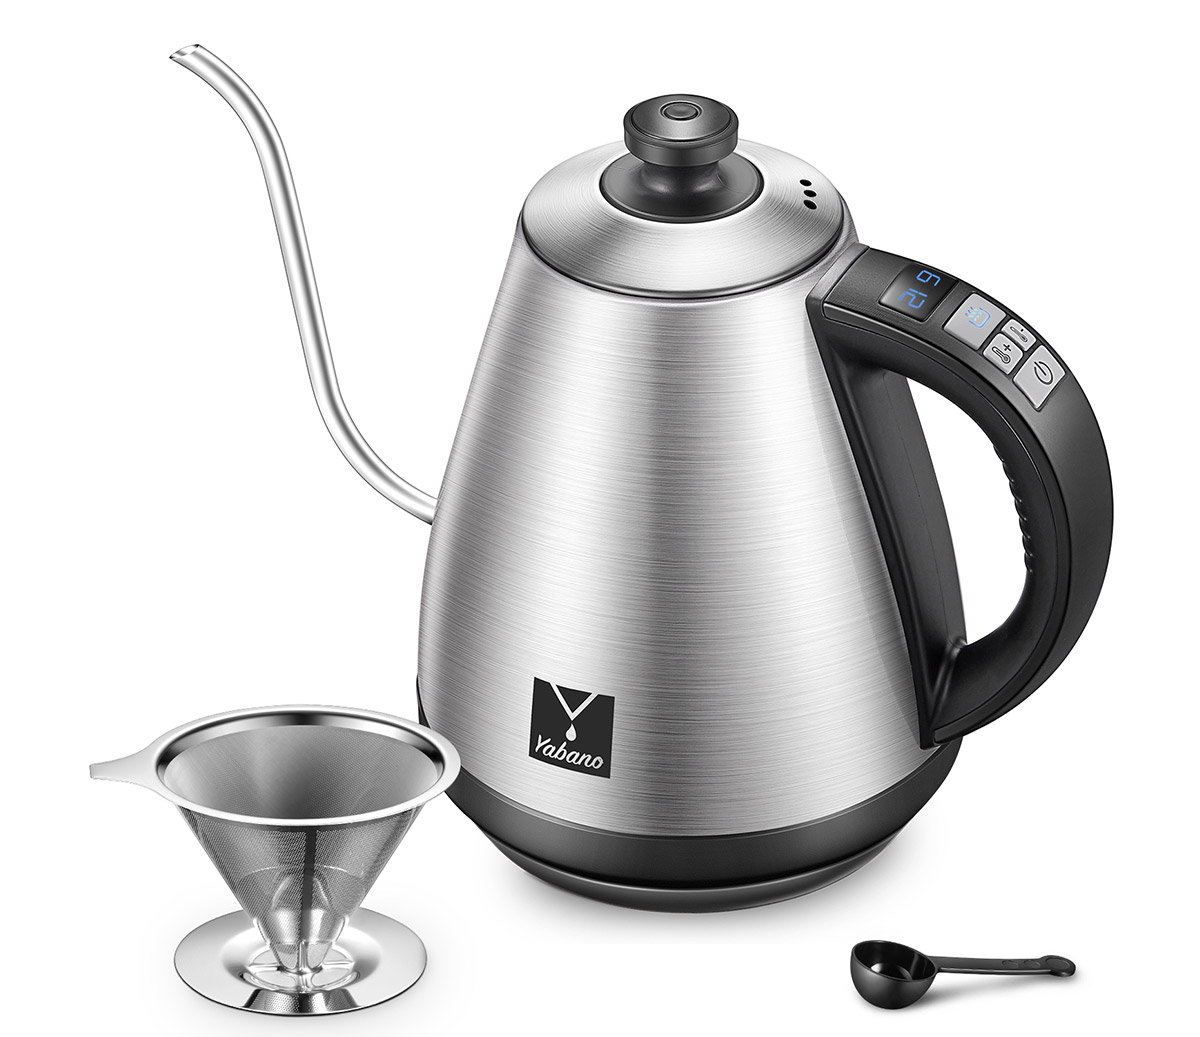 Electric Kettle, Yabano Gooseneck Pour Over Coffee Kettle, Digital Variable Temperature Control Kettle for Coffee and Tea, Stainless Steel and LED Display, Auto Shut-off and Keep Warm, 1000W